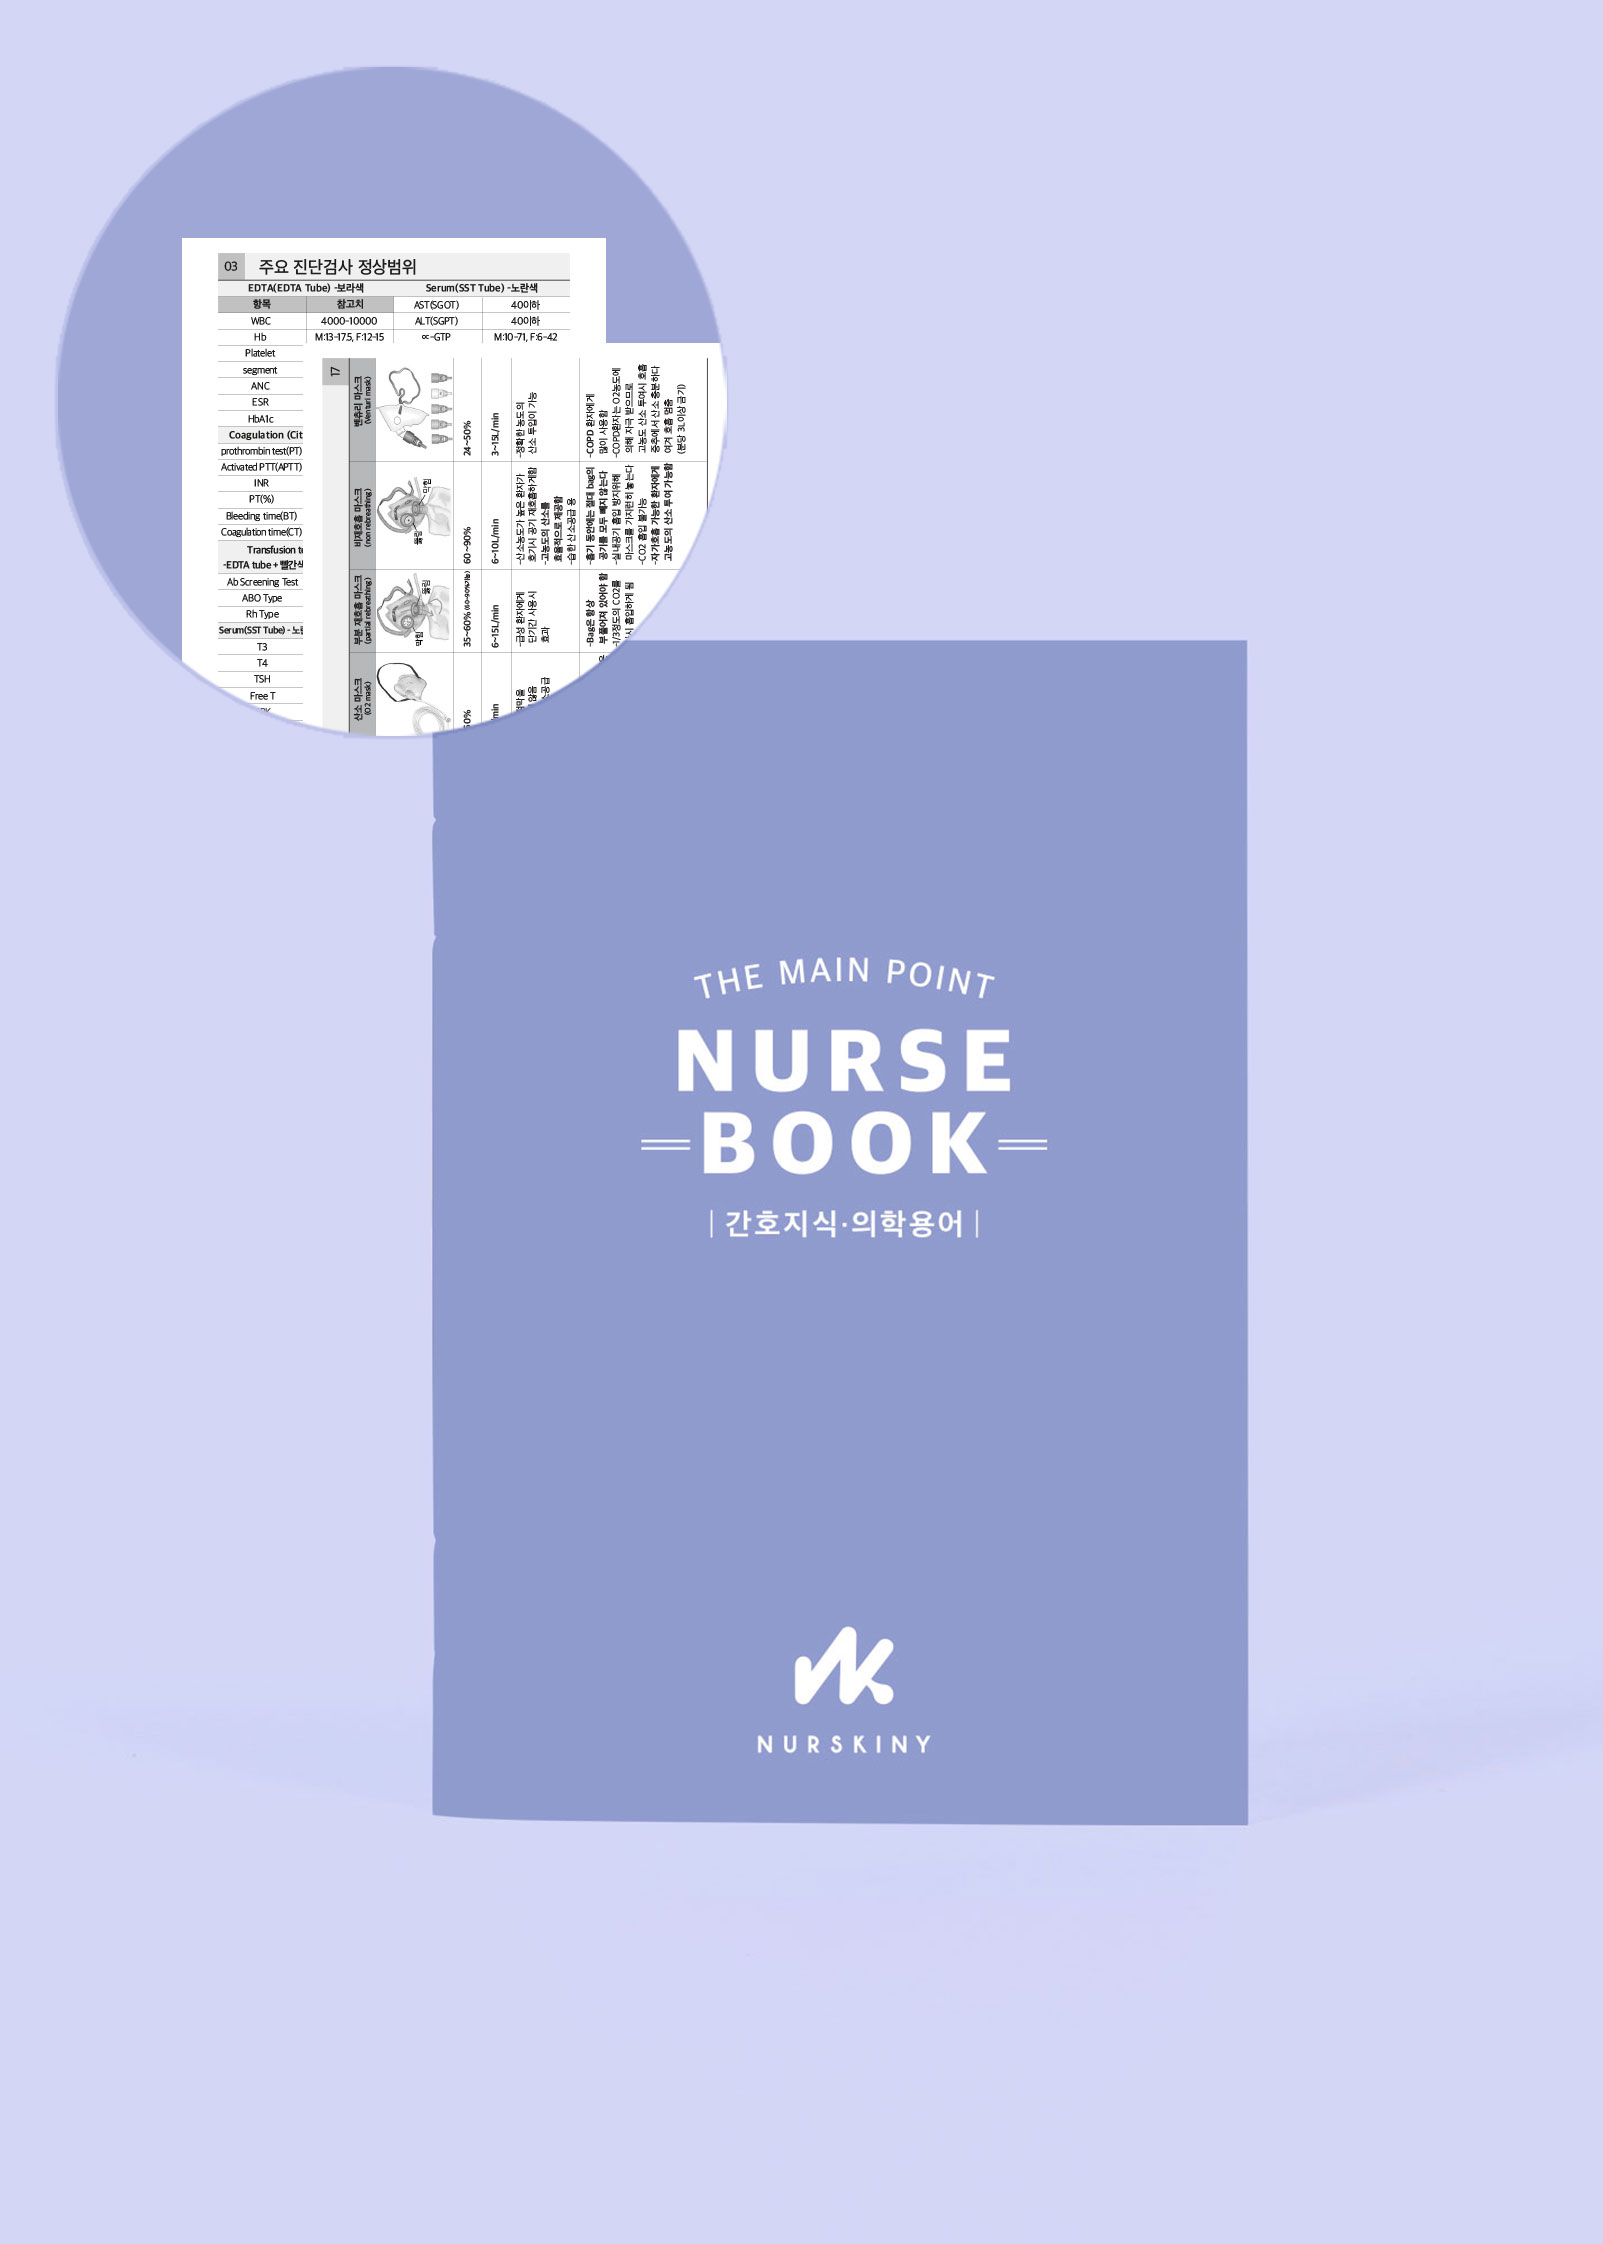 Nursing knowledge notebook black and white ver.